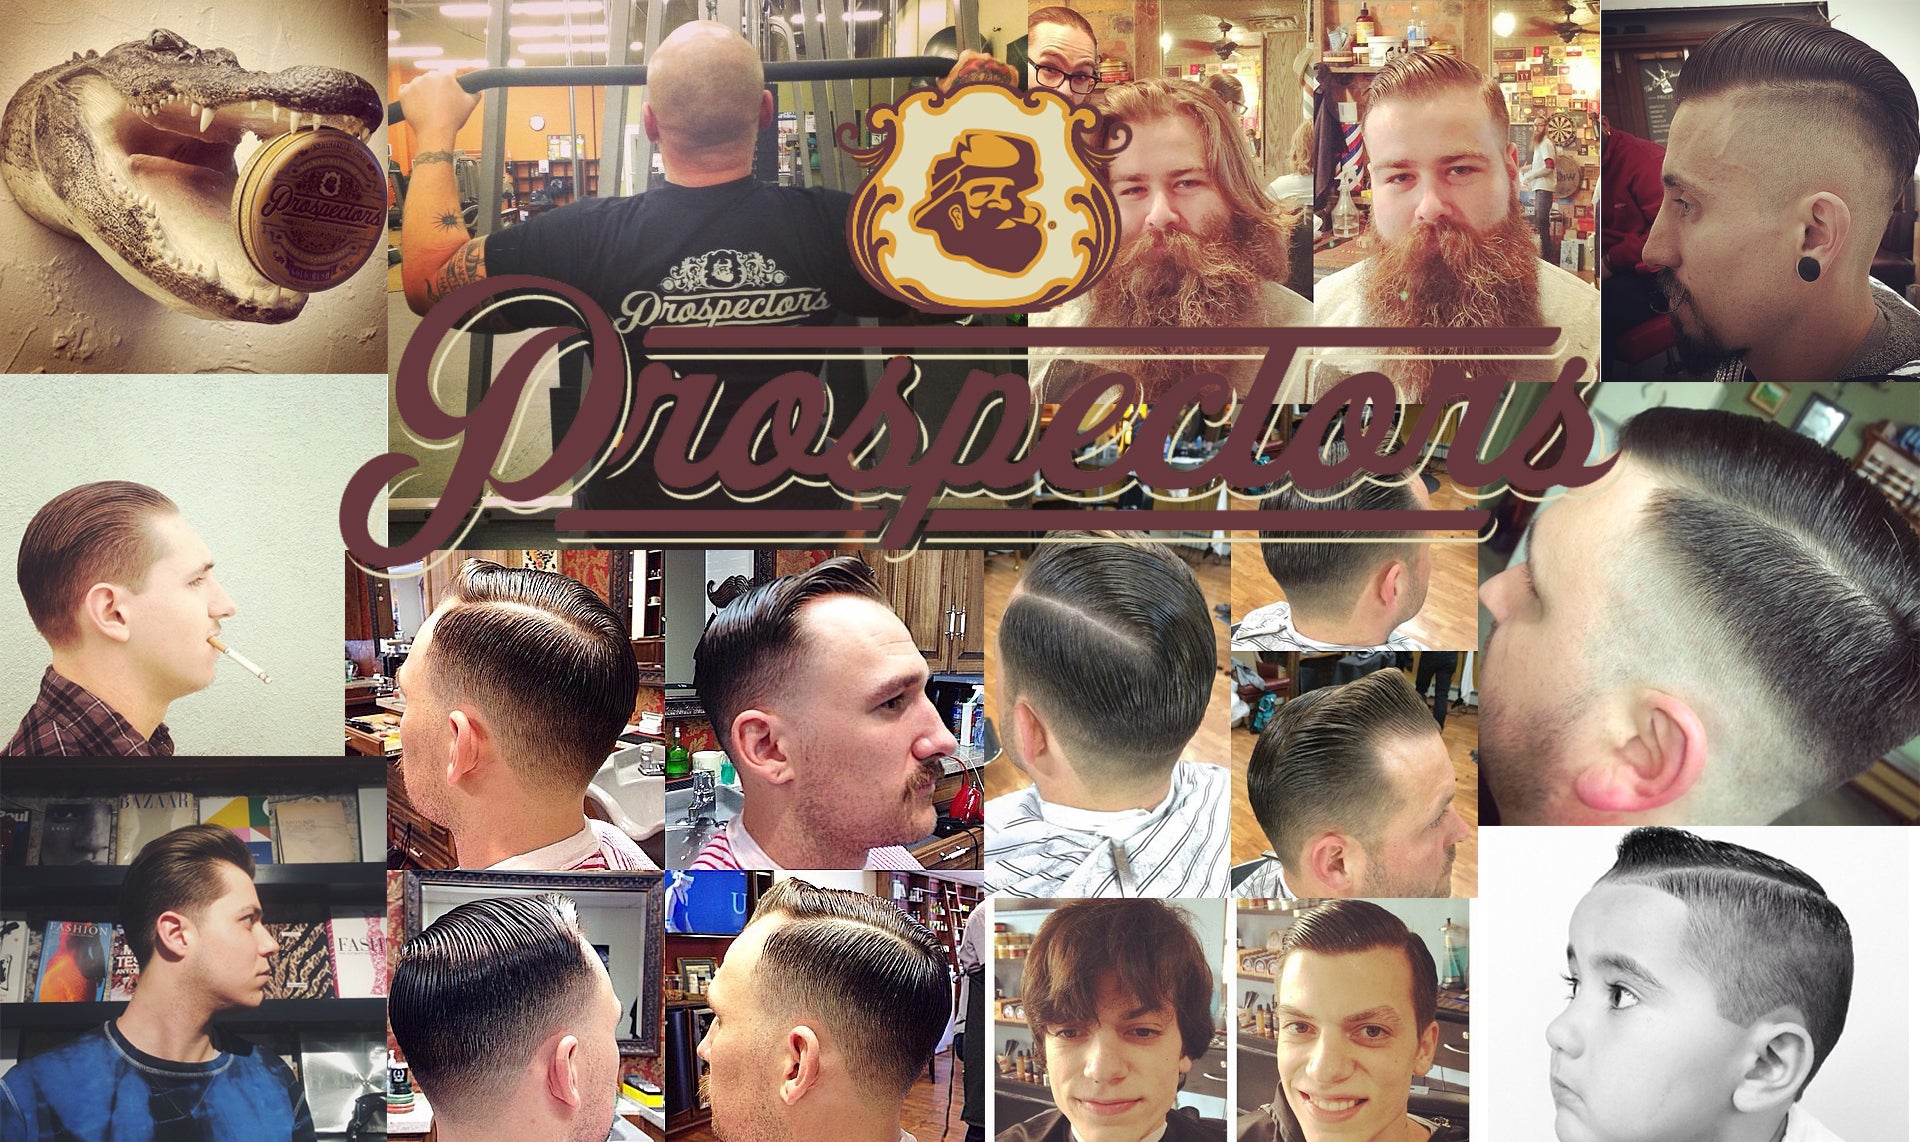 Collage Prospectors pomade supporters barbers hairstyles barbershop 